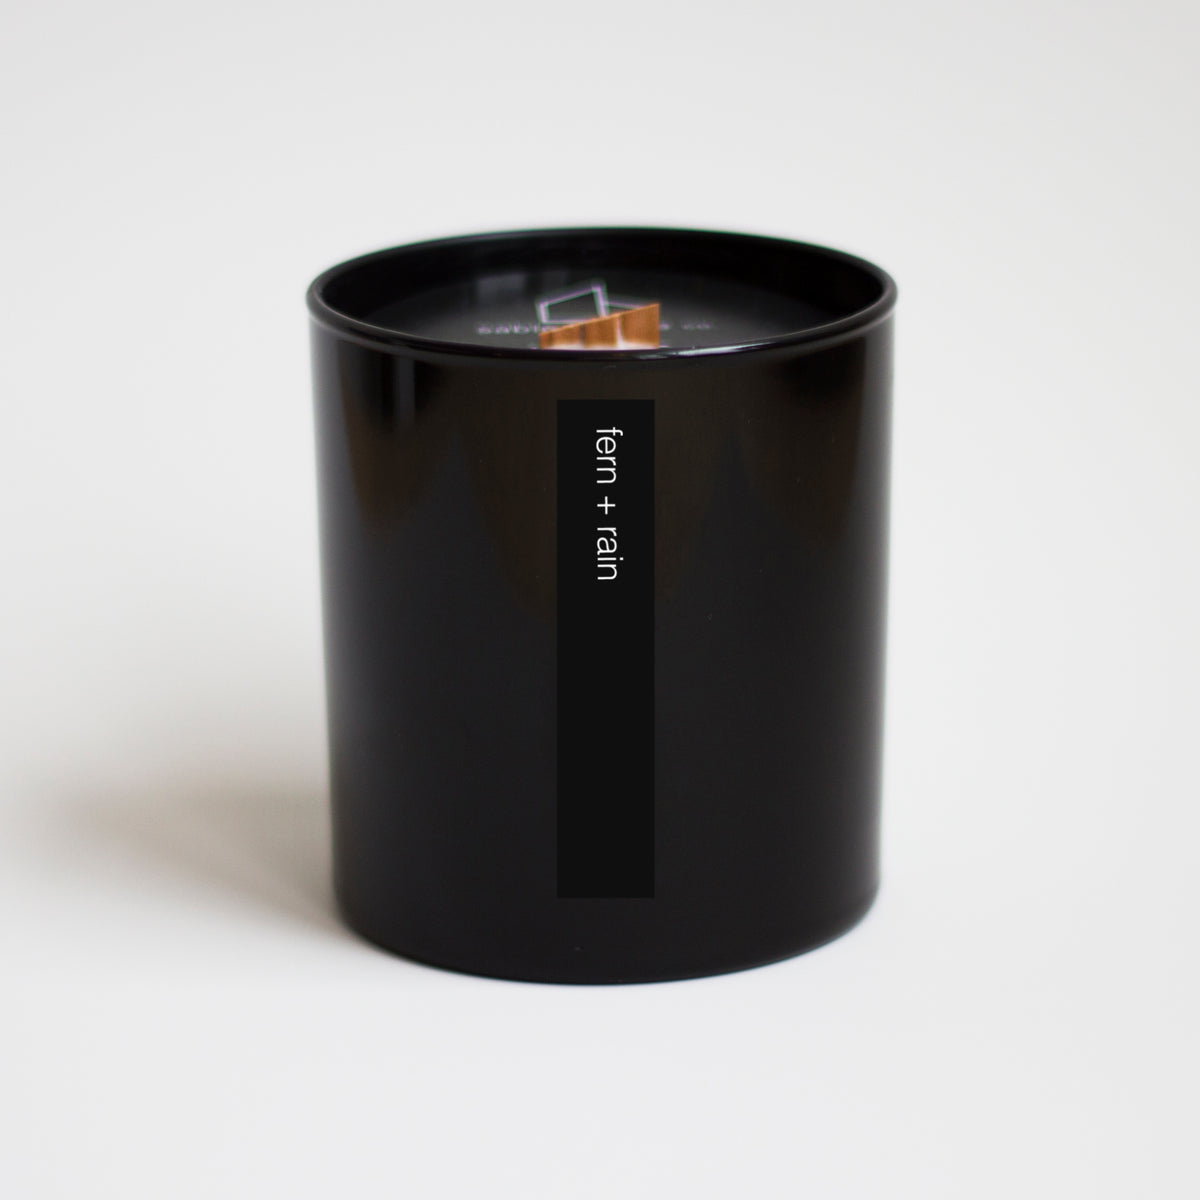 Candle with wood wick inside black canister with the words &quot;fern + rain&quot; in white lower case letters.